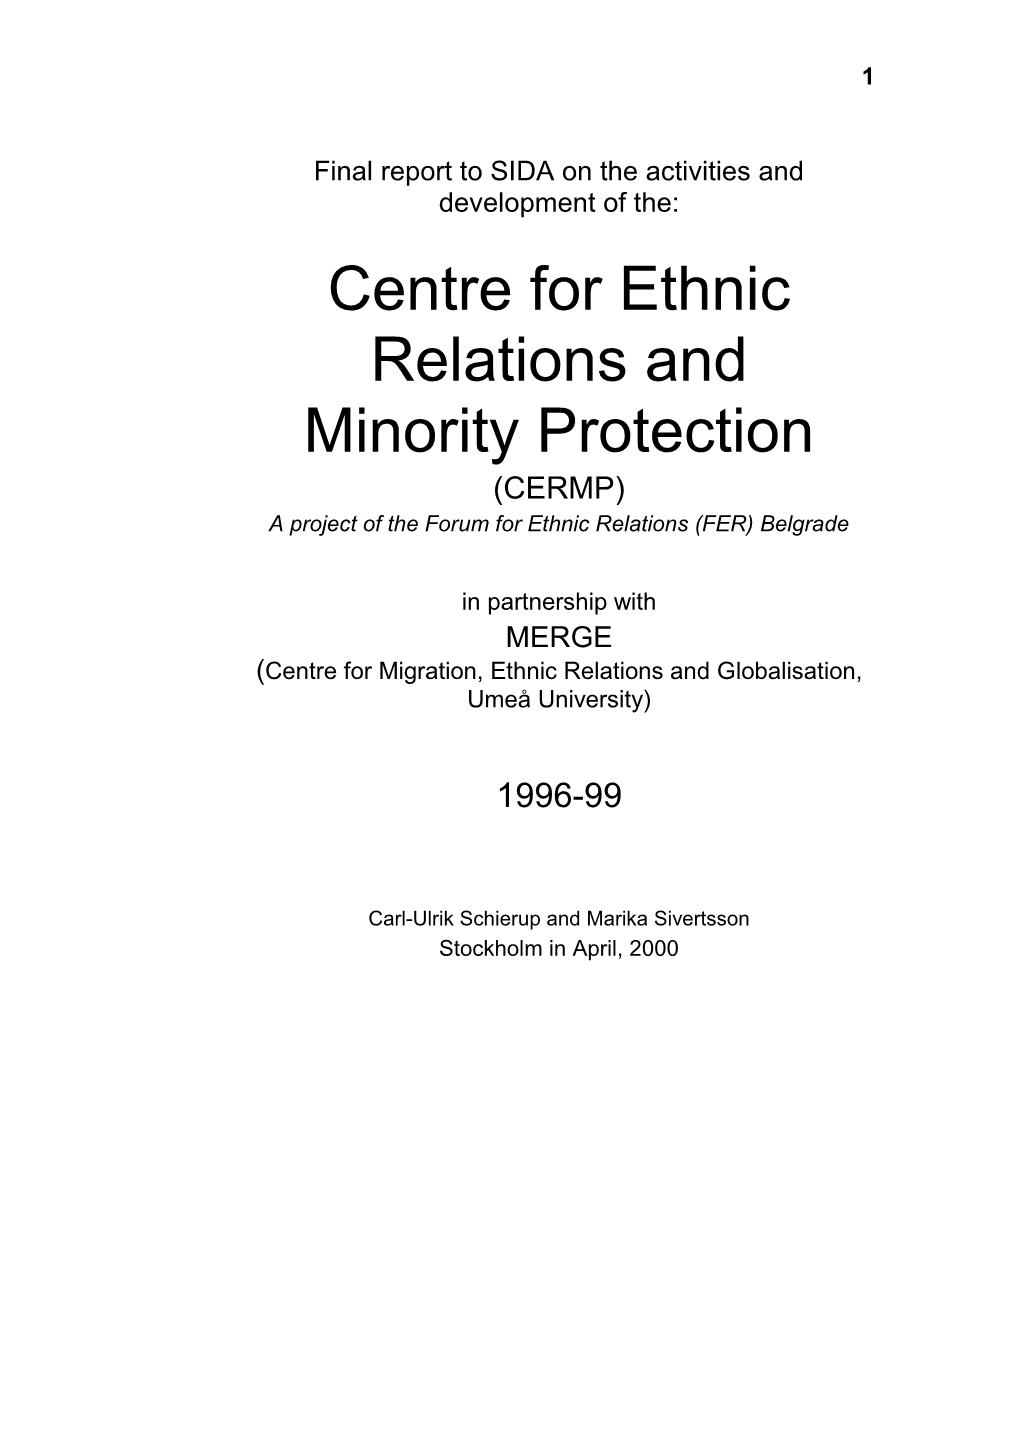 Centre for Ethnic Relations and Minority Protection (CERMP) a Project of the Forum for Ethnic Relations (FER) Belgrade